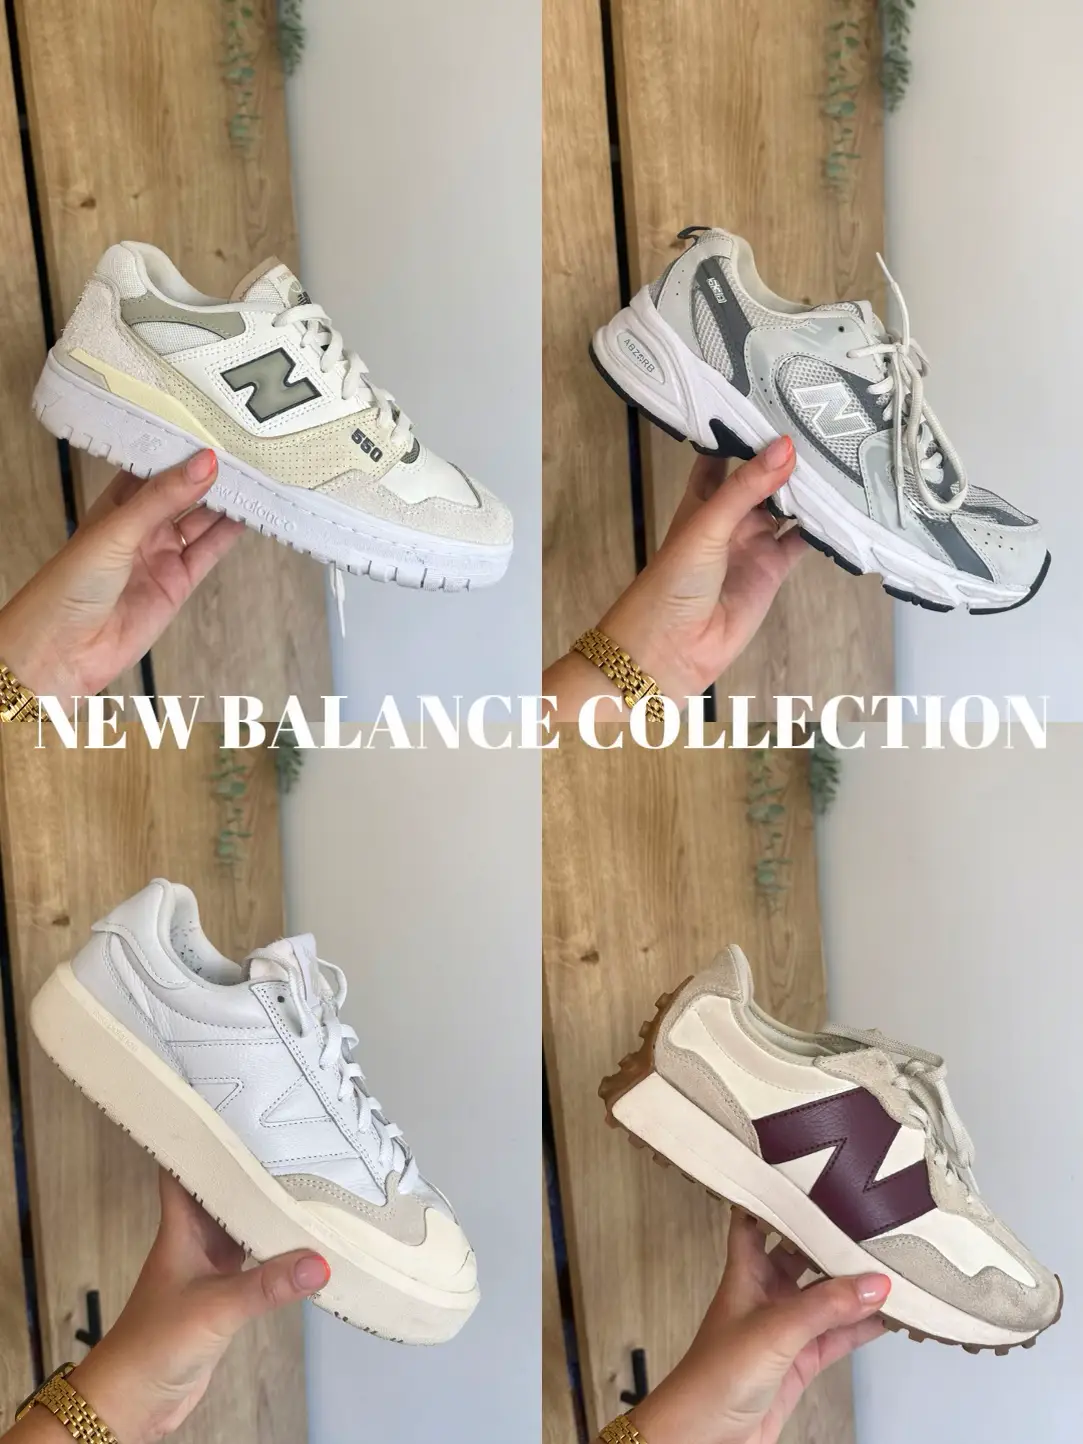 NEW BALANCE COLLECTION, Gallery posted by Elbuckles